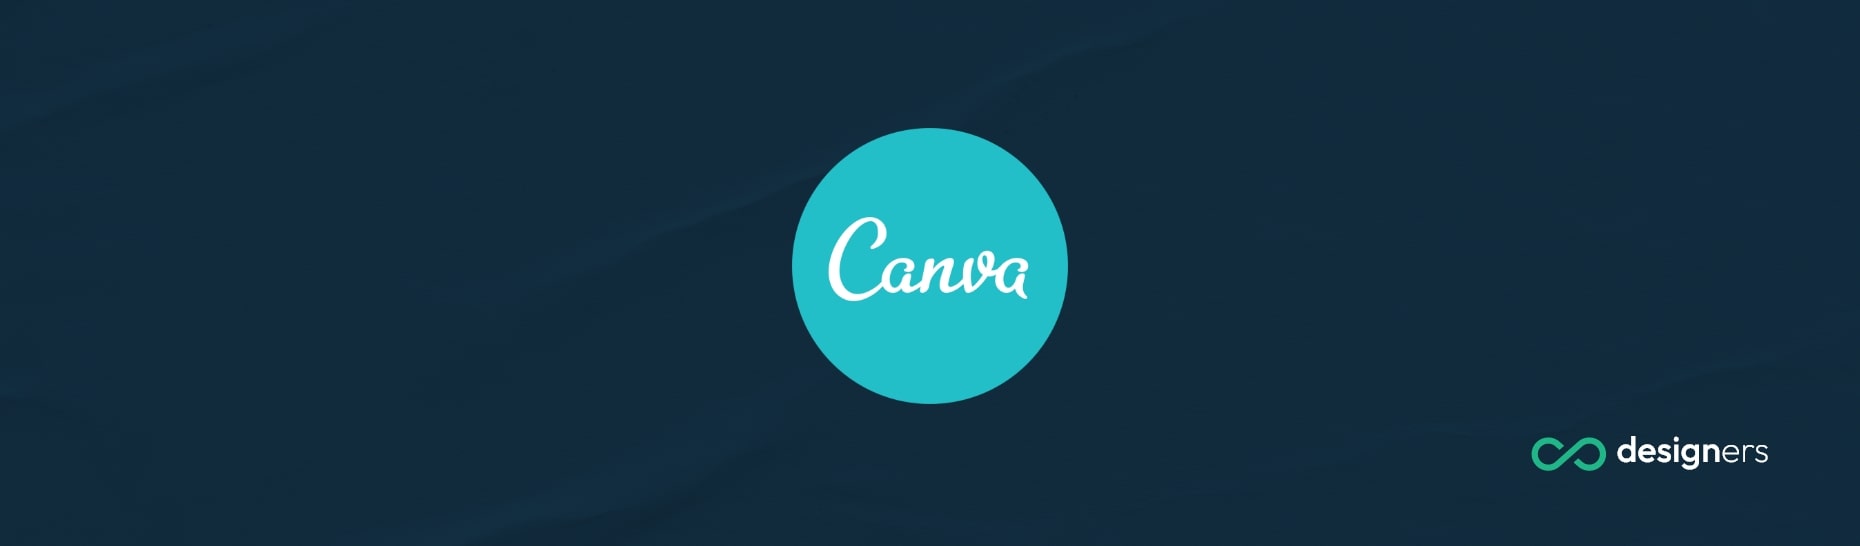 Is Canva an Open Source Software?